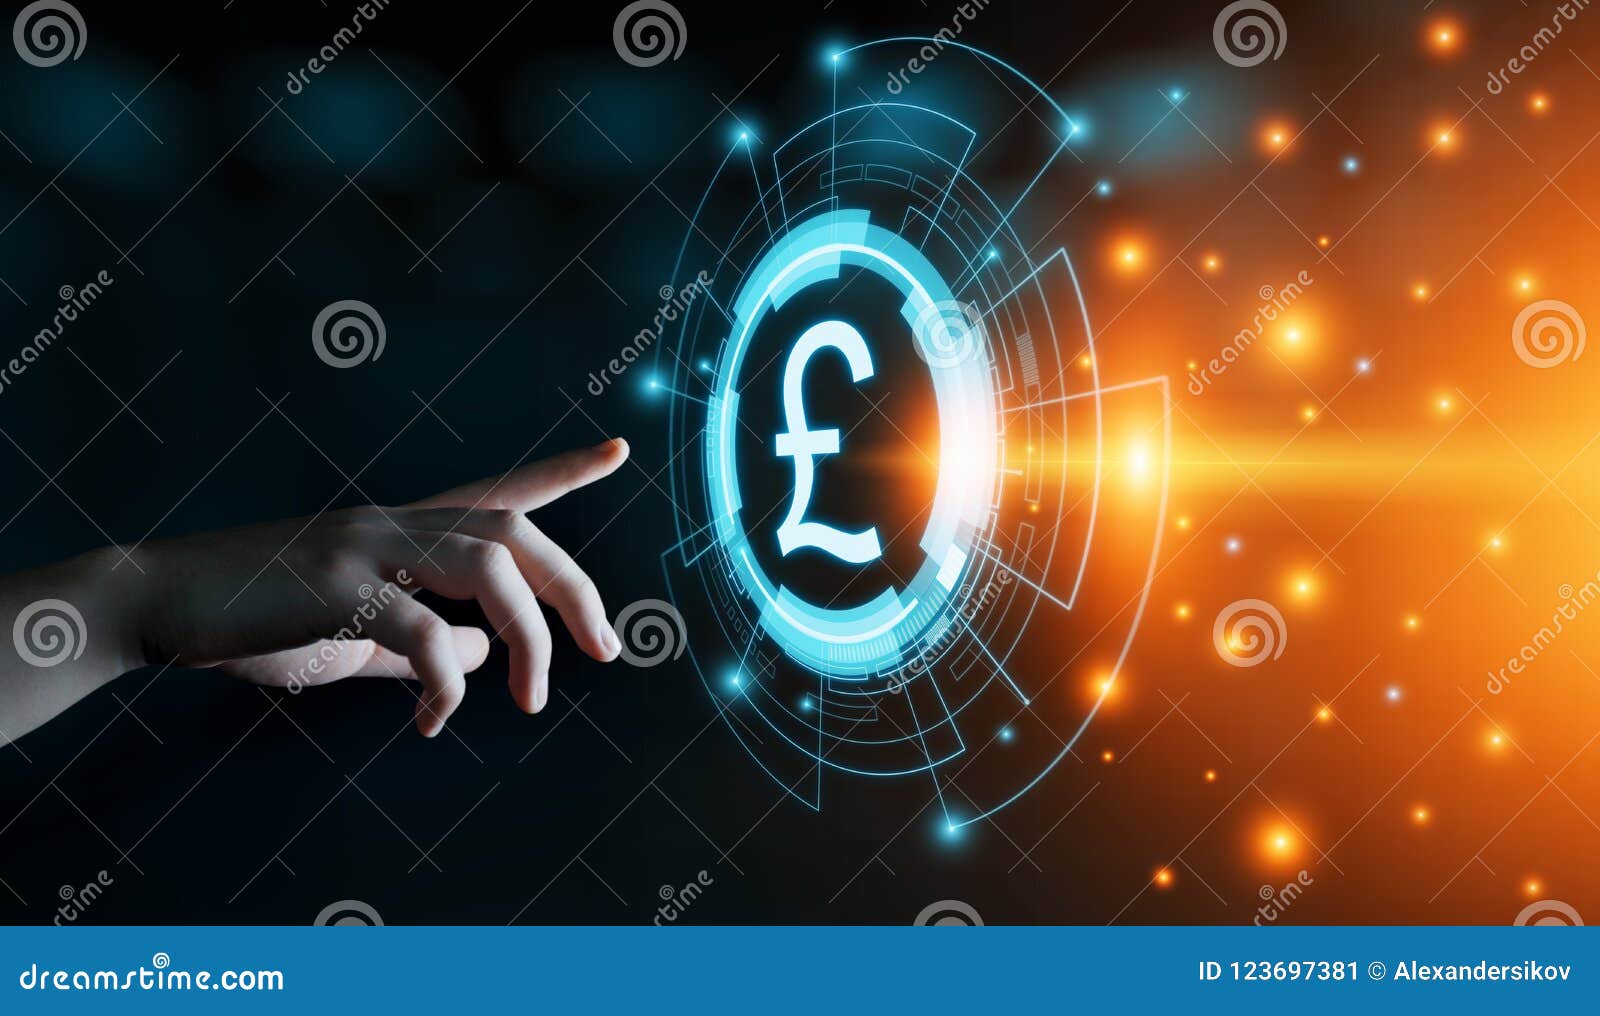 pound currency business banking finance technology concept